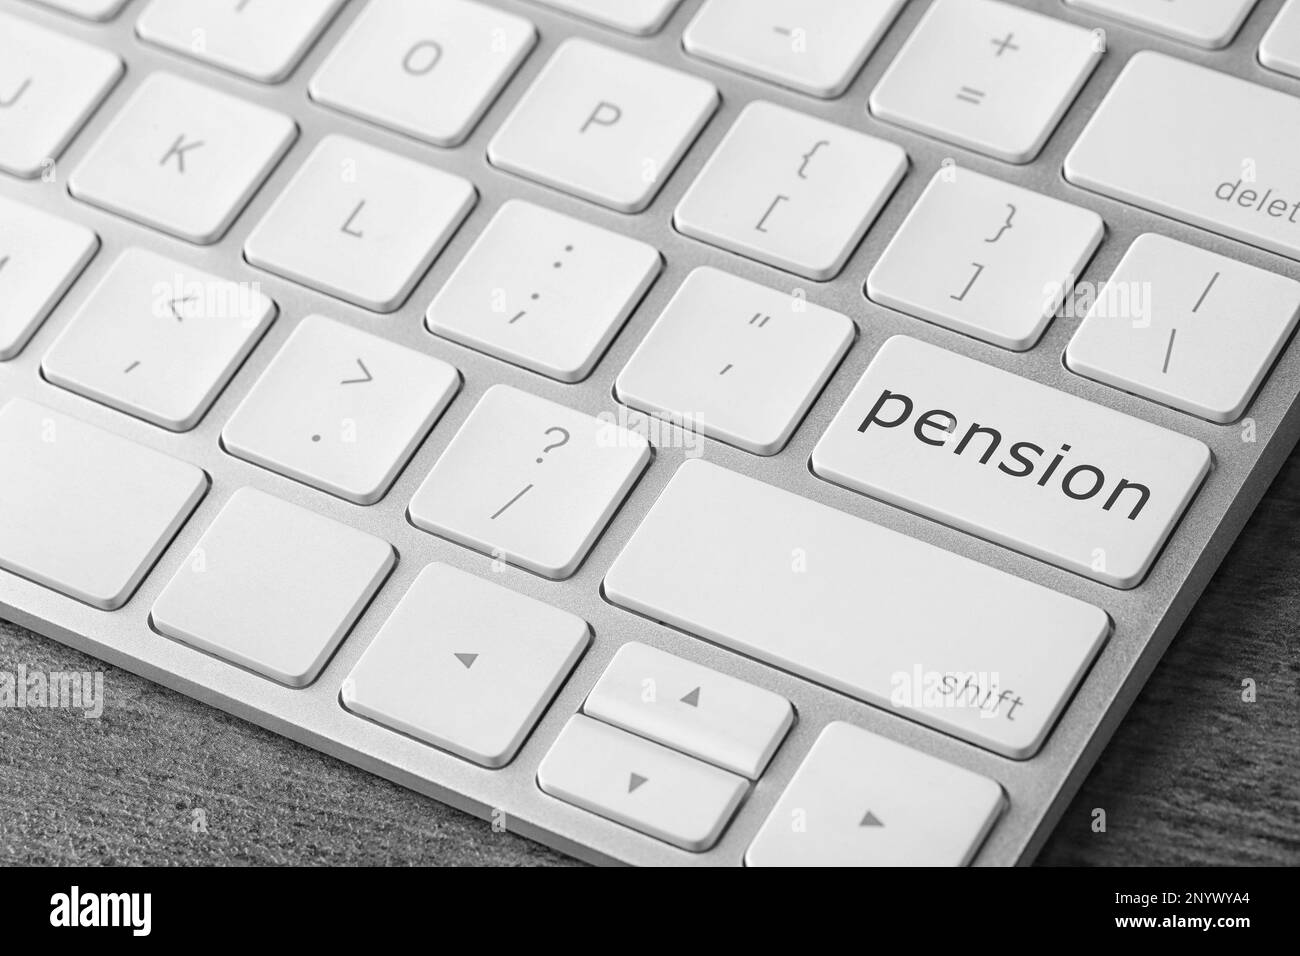 Modern computer keyboard with word Pension on button, closeup view Stock Photo